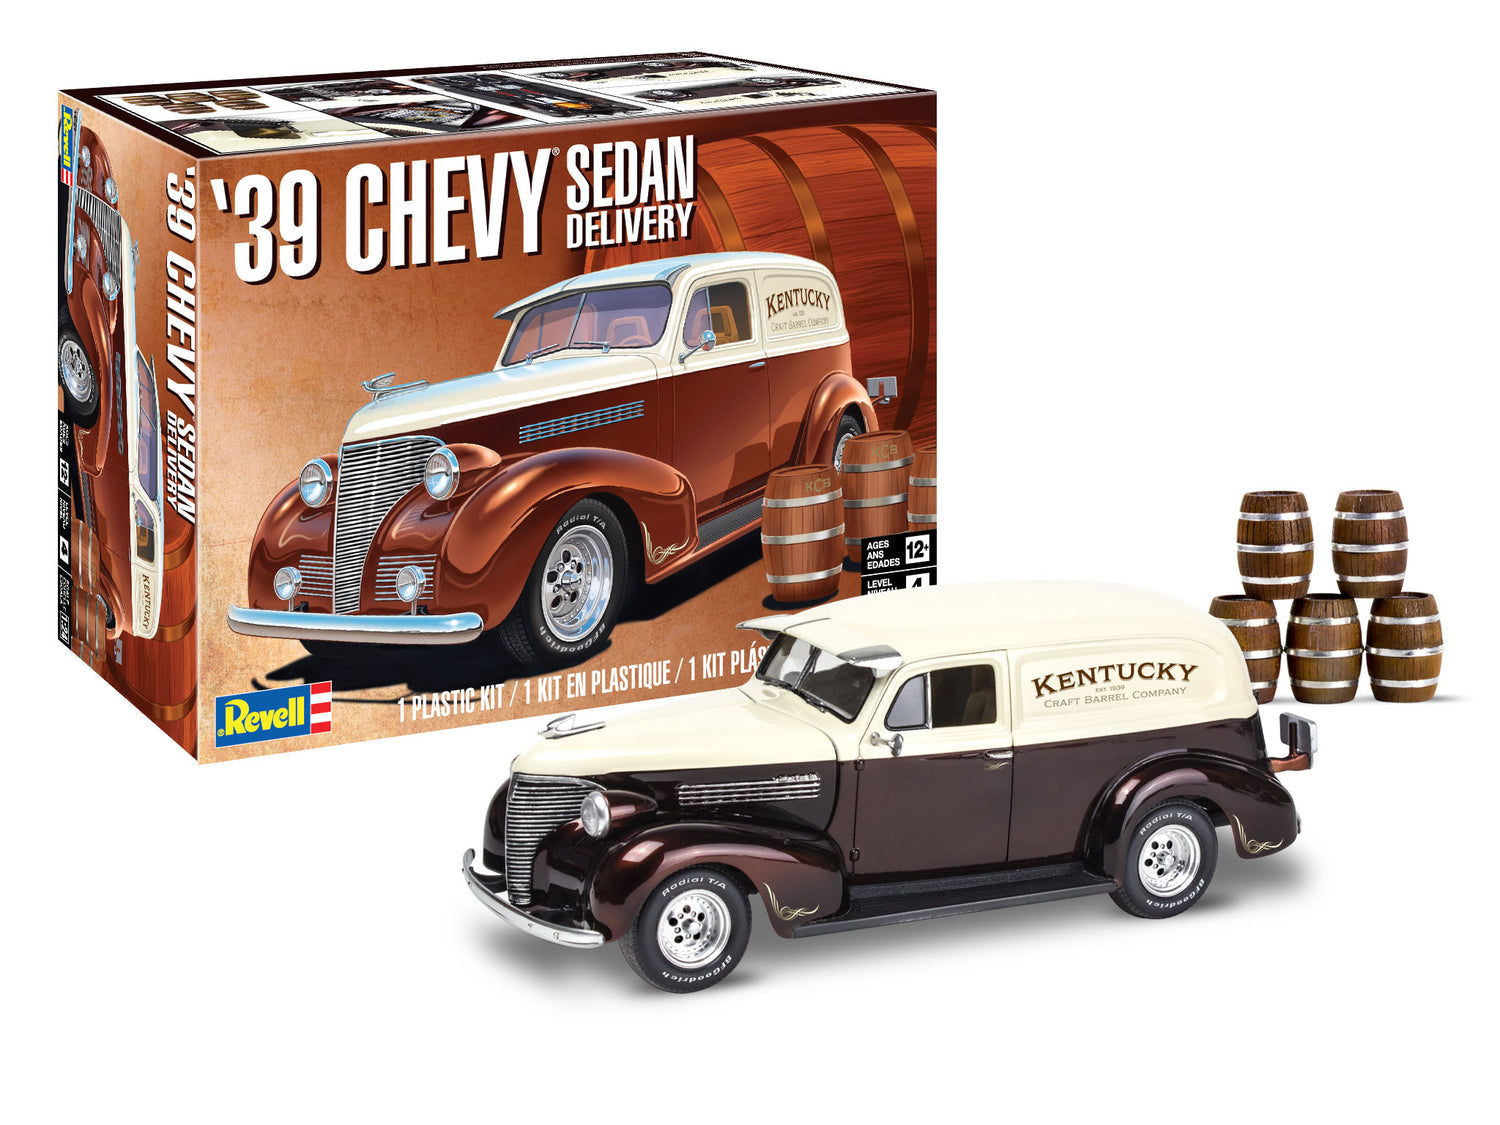 Revell 14529 1939 Chevy Sedan Delivery 1/24 Scale Model Kit